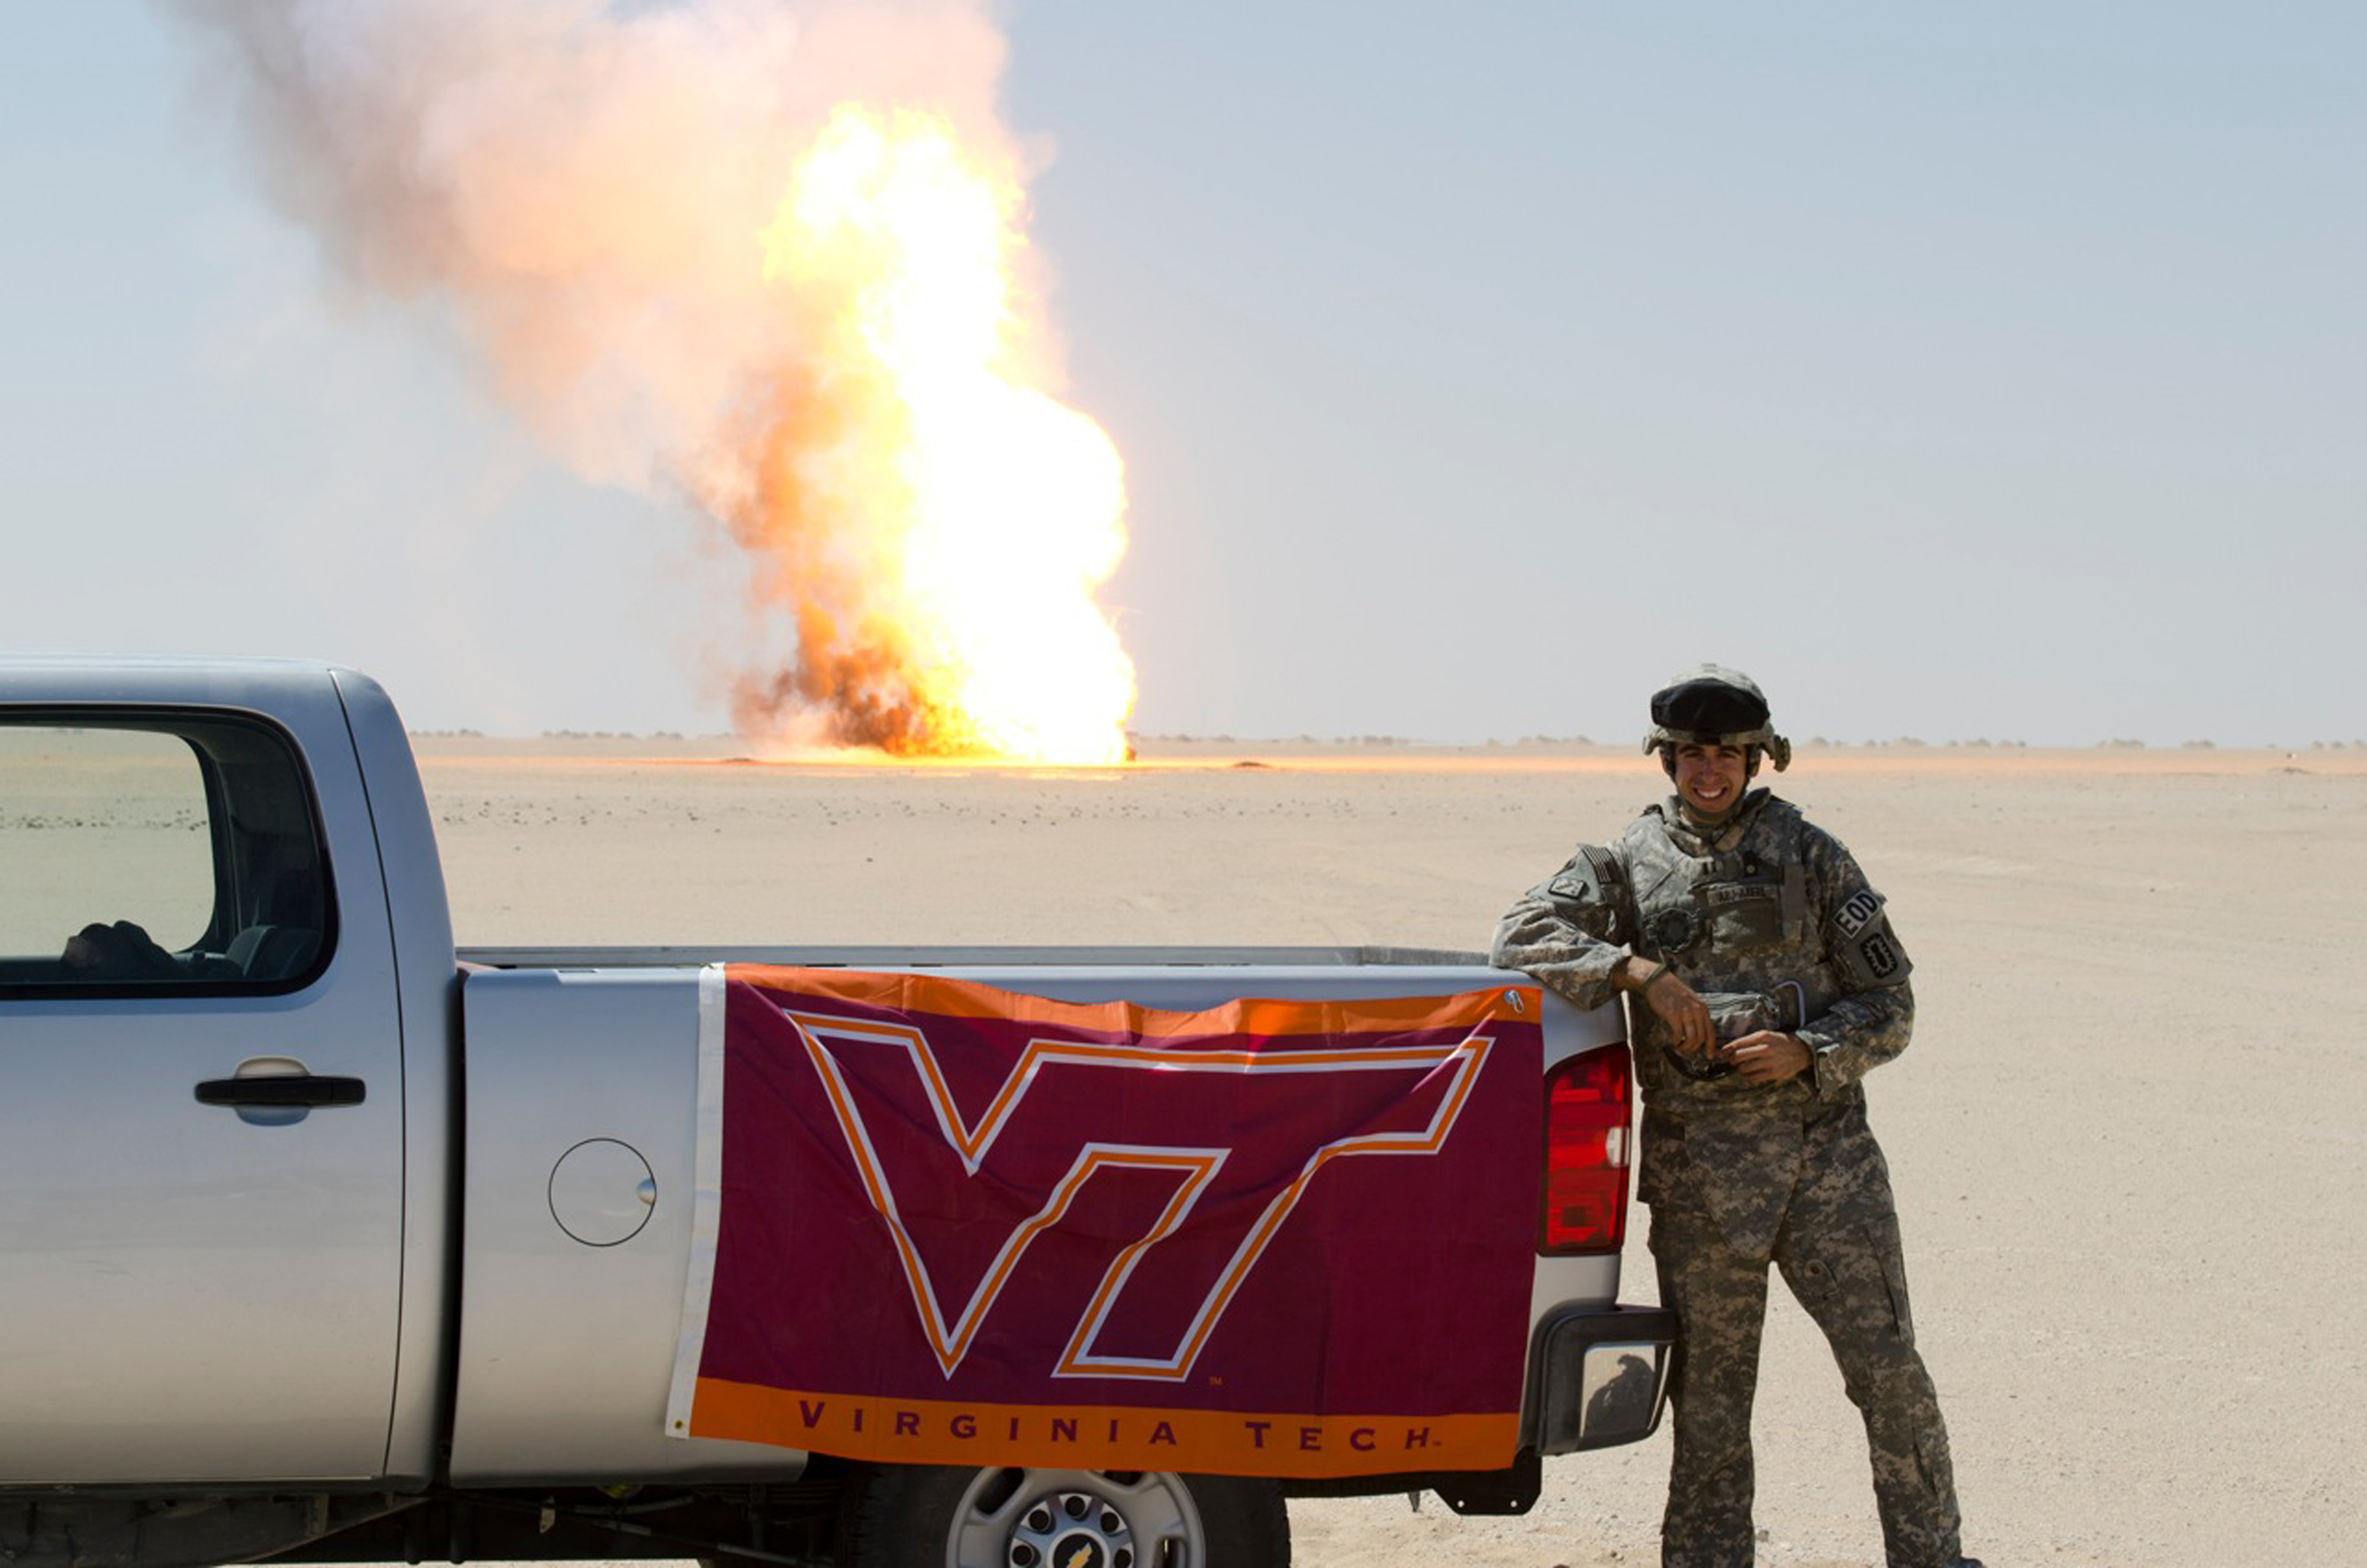 Capt. Amir Abu-Akeel, U.S. Army, Virginia Tech Corps of Cadets Class of 2006 standing in front a controlled explosion from his deployed location